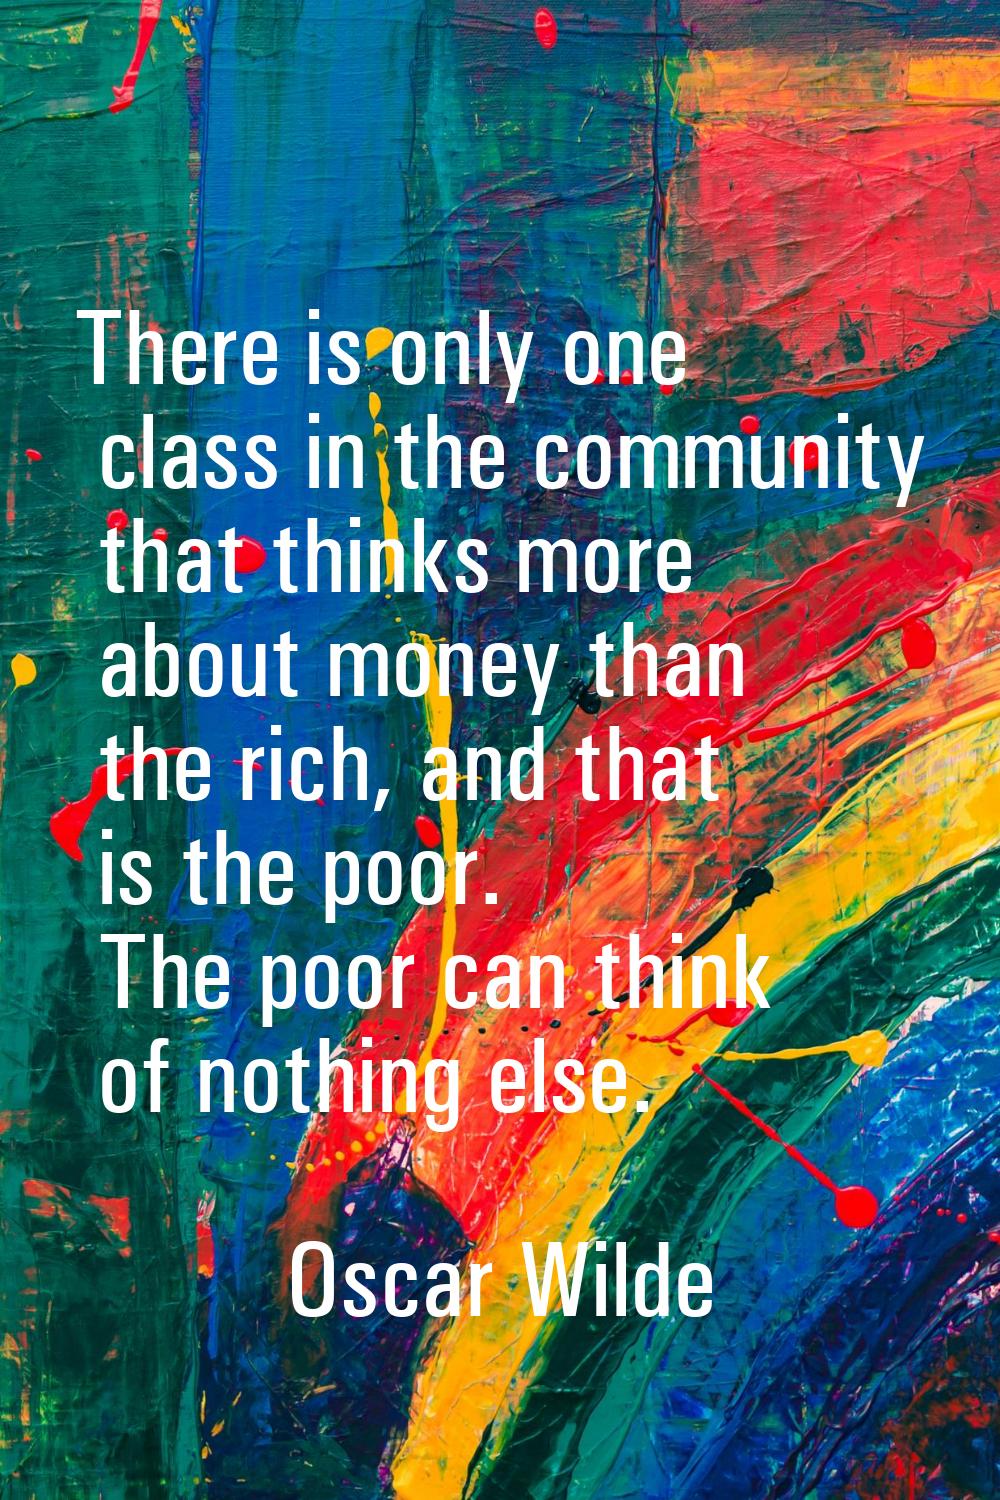 There is only one class in the community that thinks more about money than the rich, and that is th